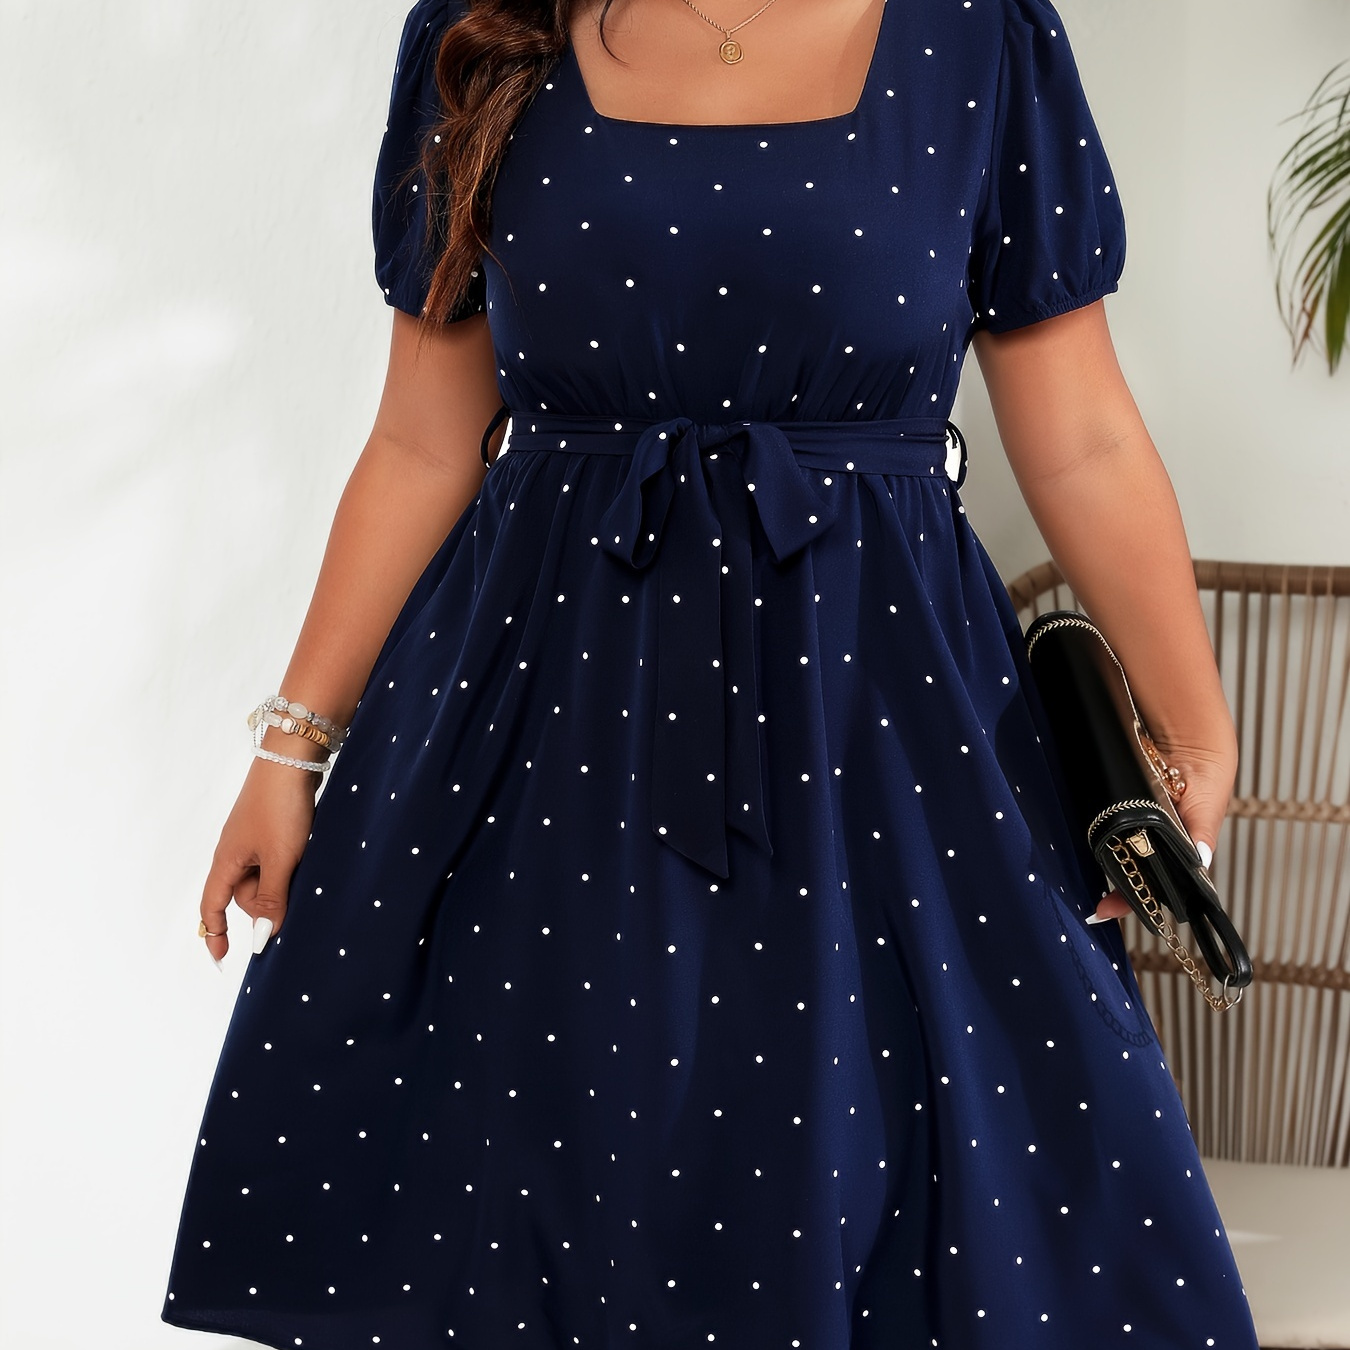 

Plus Size Polka Dot Print Dress, Casual Square Neck Short Sleeve Belted Dress, Women's Plus Size Clothing